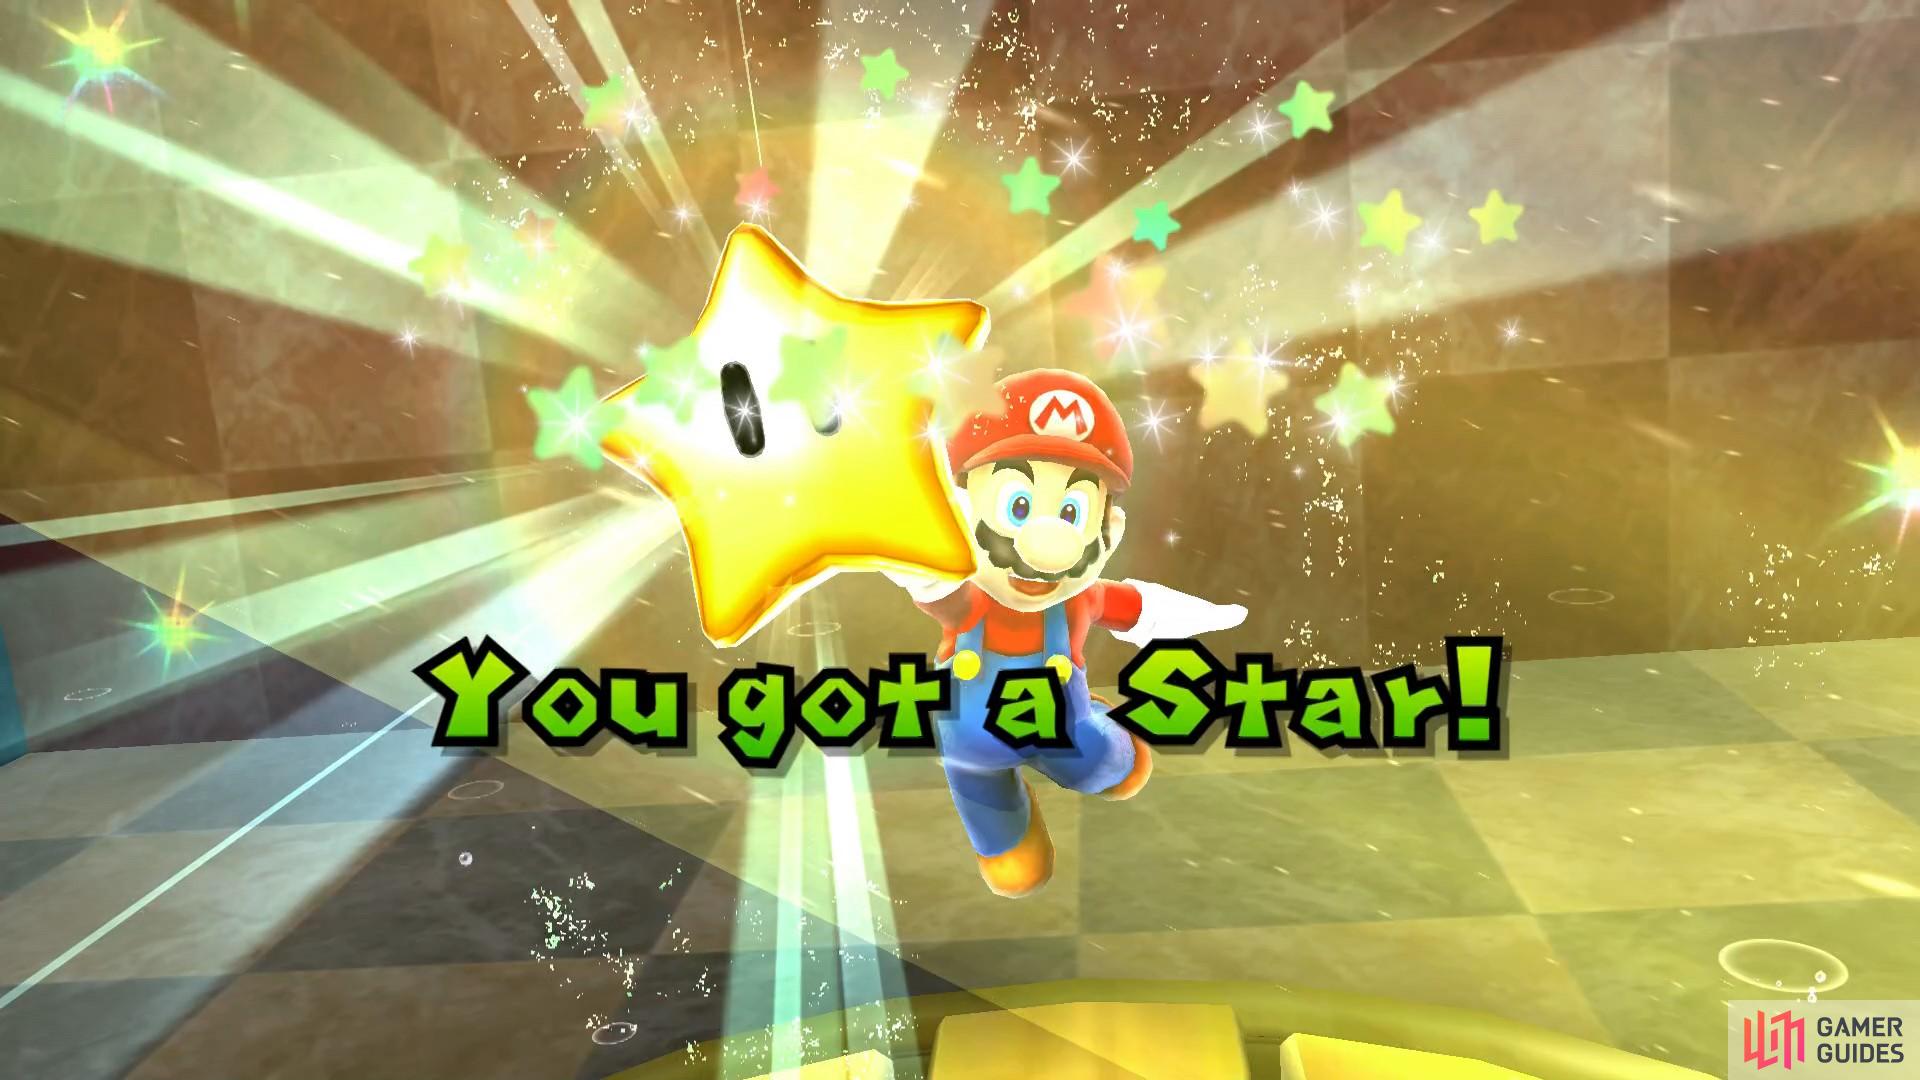 Defeat the Boo using the spotlight so you can grab the hidden Power Star.